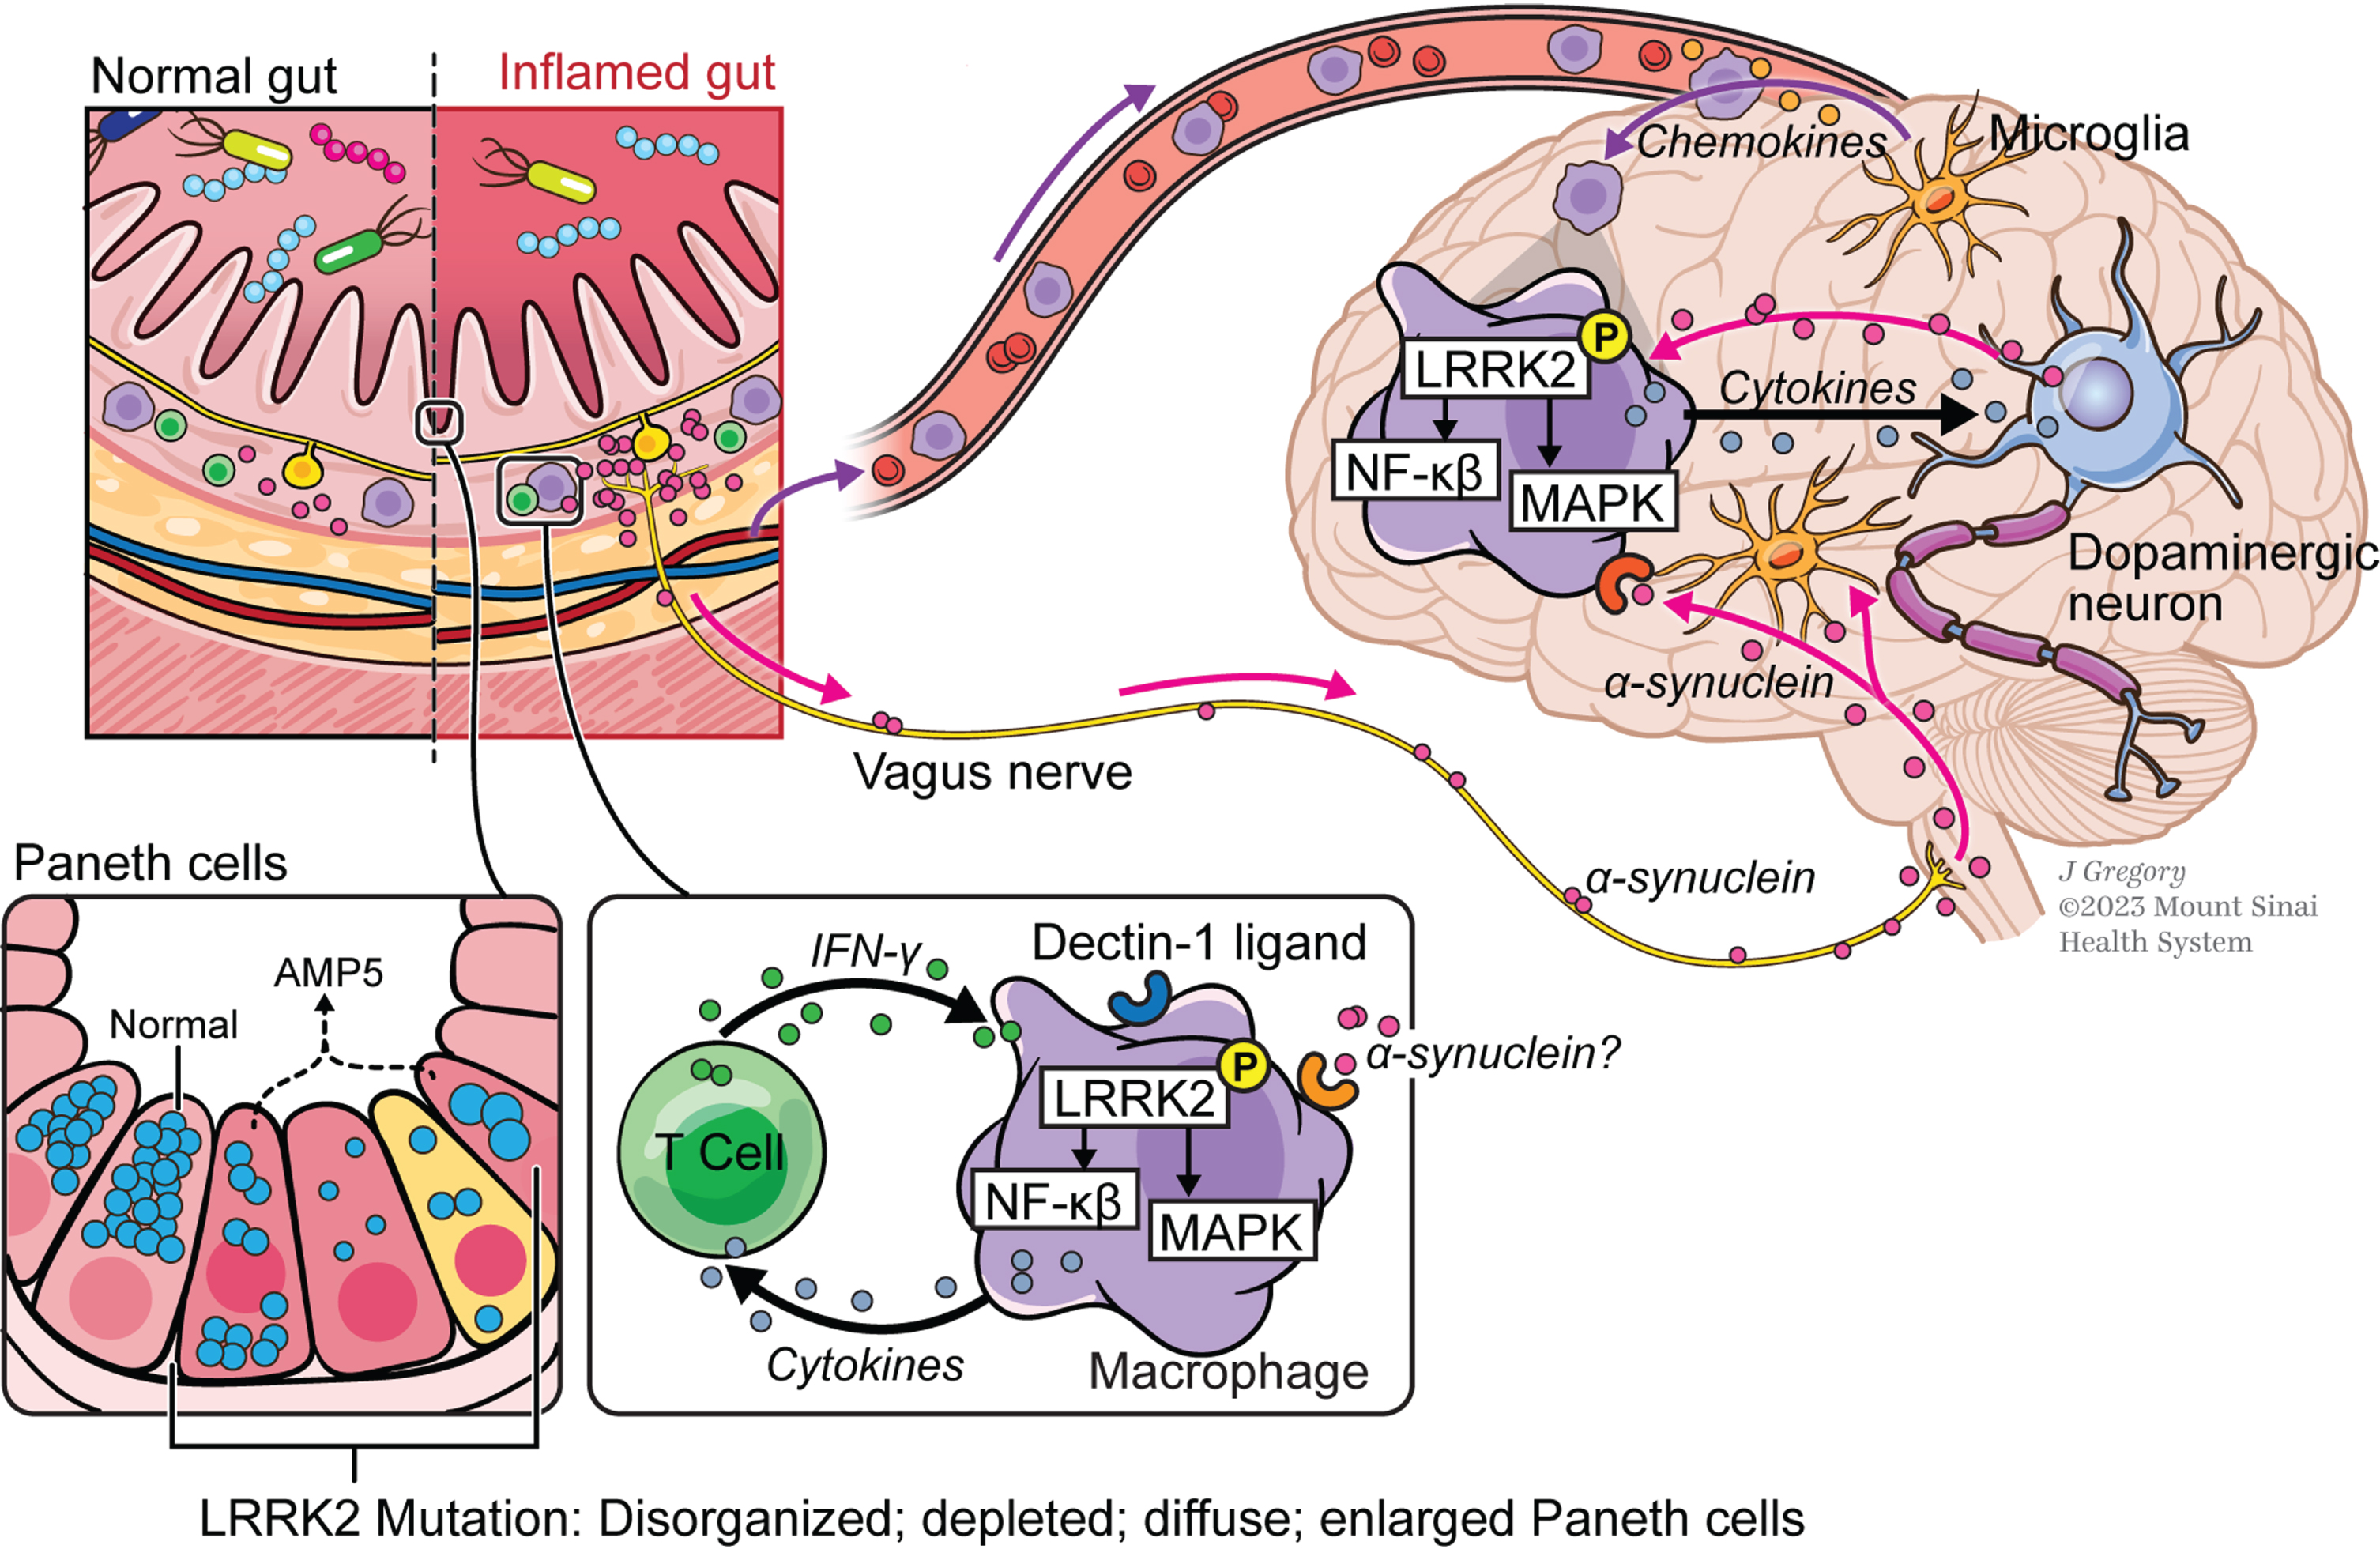 The gut-brain axis in Parkinson’s disease (PD). In this concept of PD pathogenesis, macrophages in the gut lamina propria are induced by secreted pro-inflammatory cytokines in individuals carrying gain-of-function LRRK2 variants that express increased levels of activated LRRK2; stimulation of cells by α-synuclein from enteric nerves may also occur at this site but this is still unproven. Macrophages thus stimulated that gain entry into the circulation are attracted into brain tissue by chemokine-secreting microglia and in the brain tissue are induced to produce pathogenic inflammatory cytokines by as yet undefined stimuli, possibly including α-synuclein once again; these cytokines cause or aggravate neural degeneration. Also depicted are small intestinal Paneth cells whose function is regulated in part by LRRK2; thus, LRRK2 variants that affect this function and adversely regulate the composition of the gut microbiome may lead to PD by promoting gut inflammation.